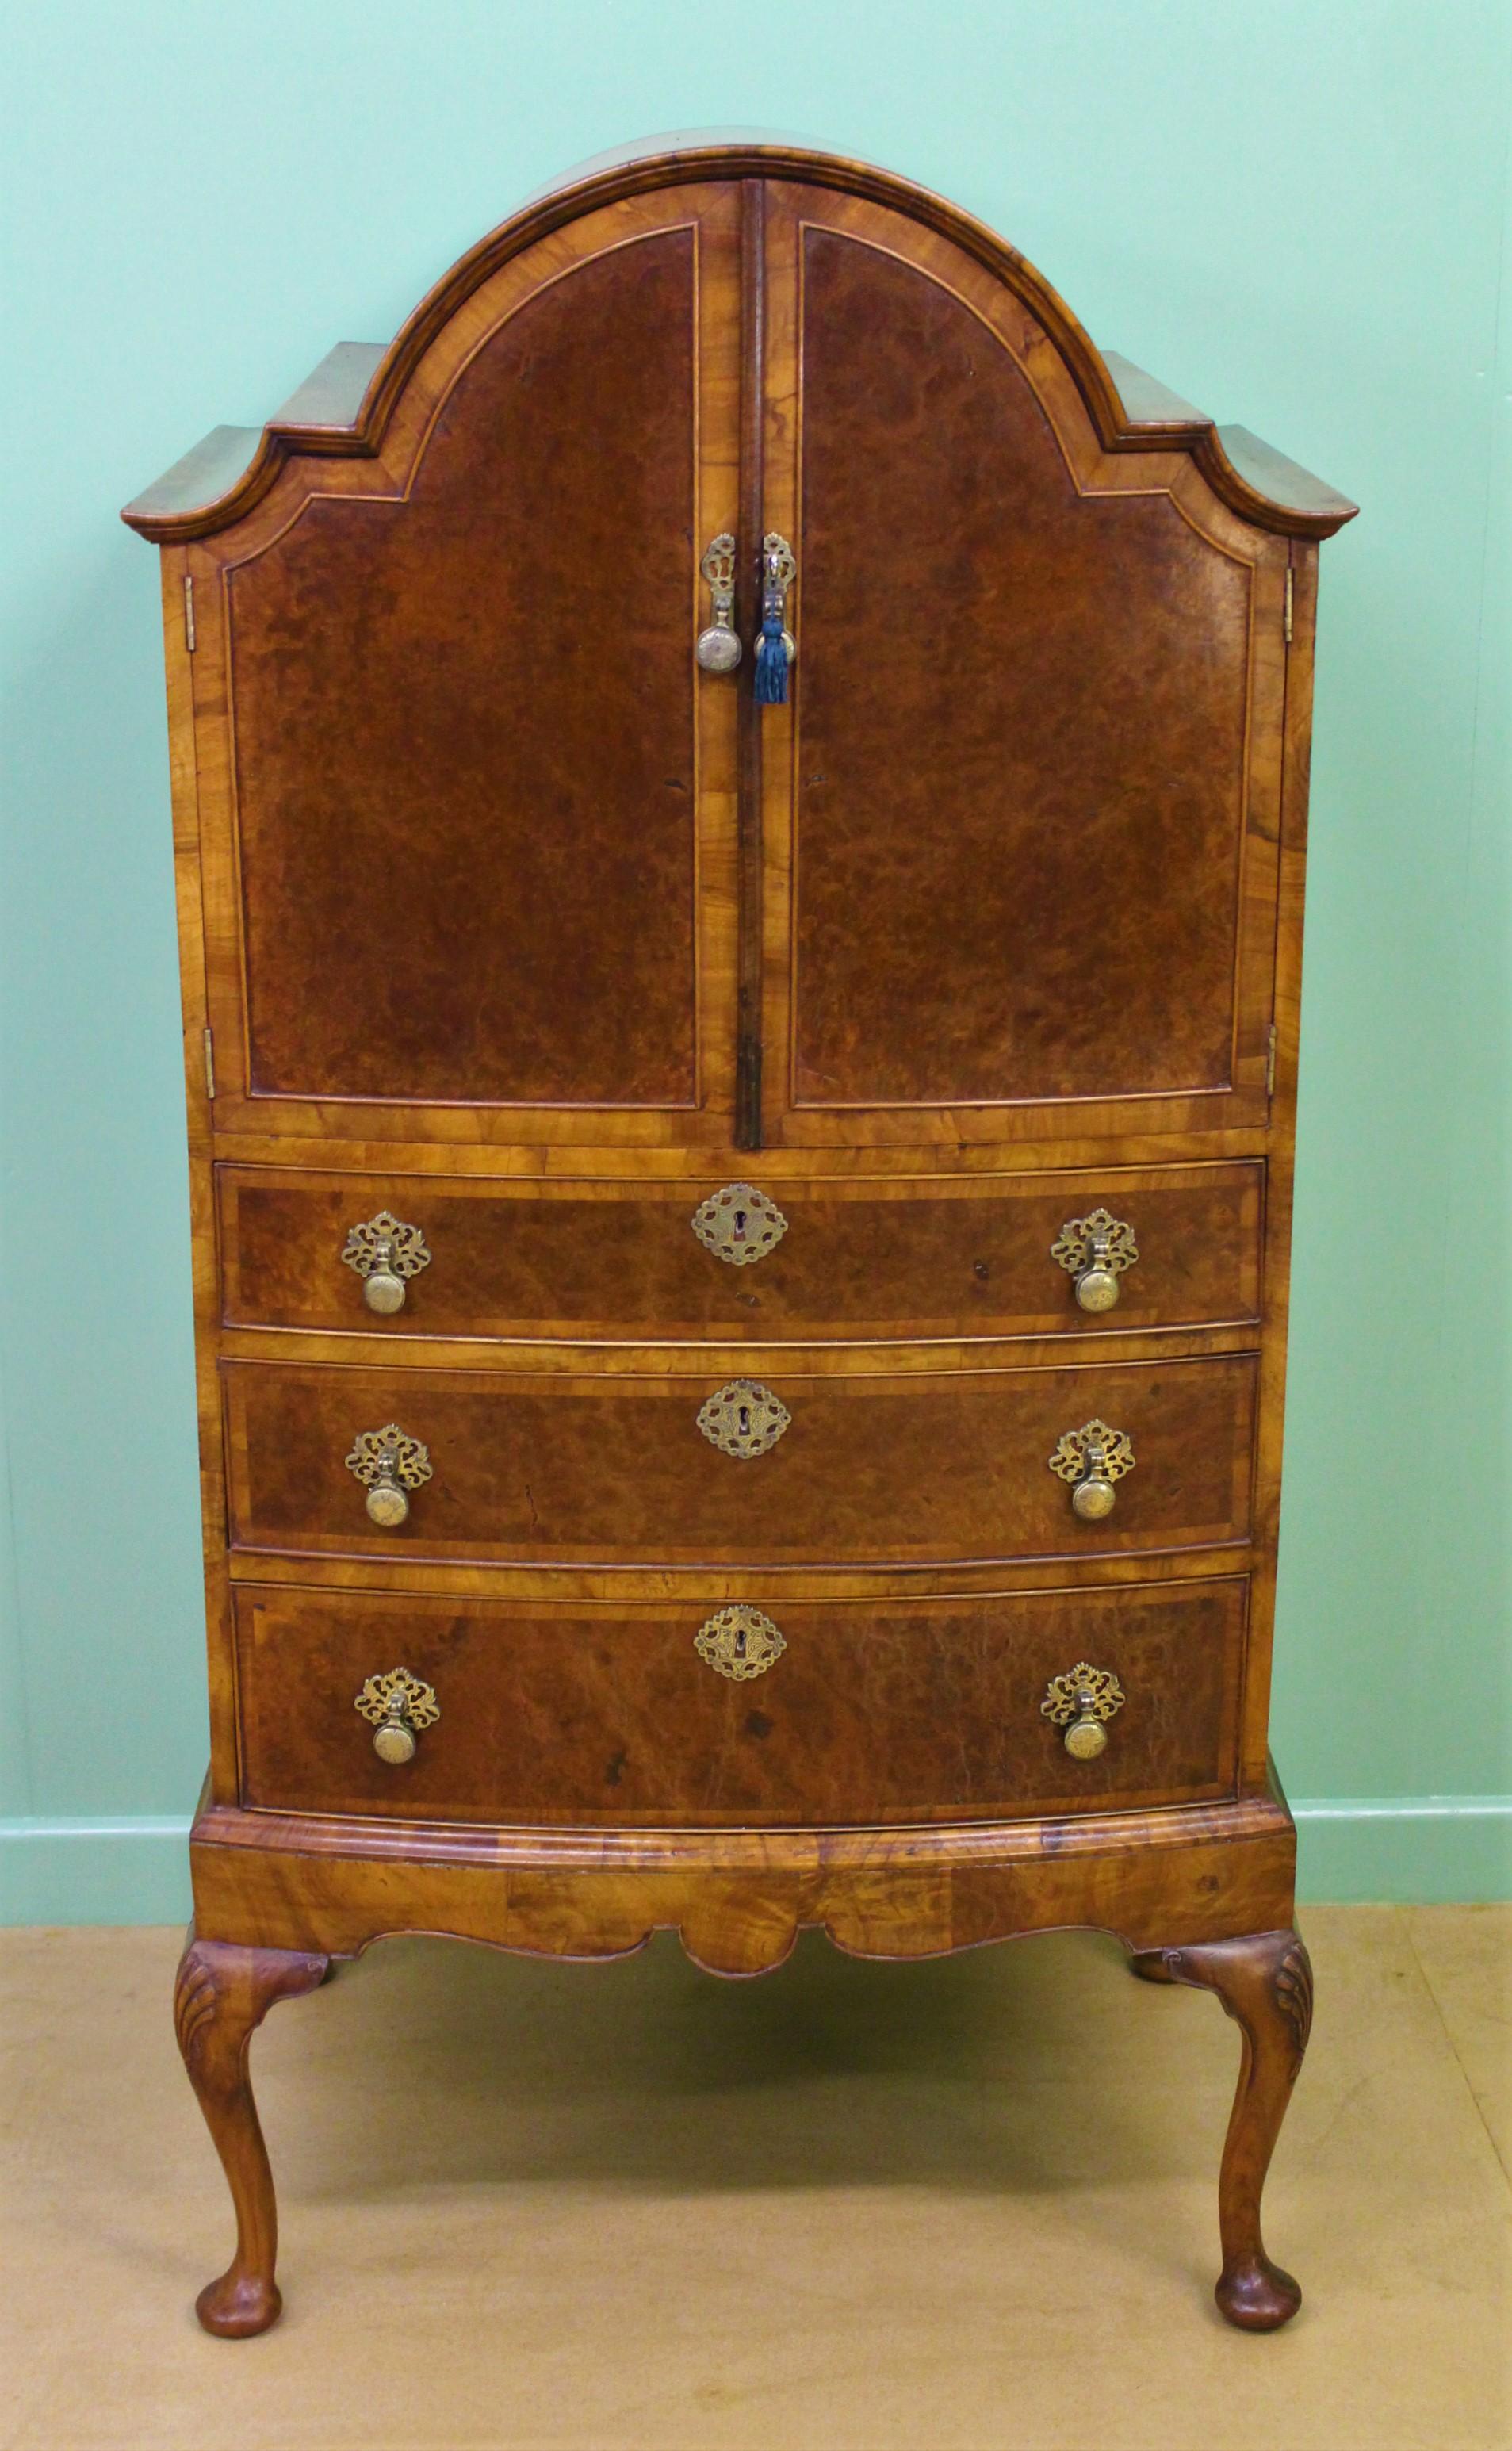 A charming burr walnut, bow-fronted, dome topped linen press of compact proportions. Well made in the Queen Anne style in walnut and with attractive burr walnut veneers. The domed top section has a pair of doors that open to reveal a shelved